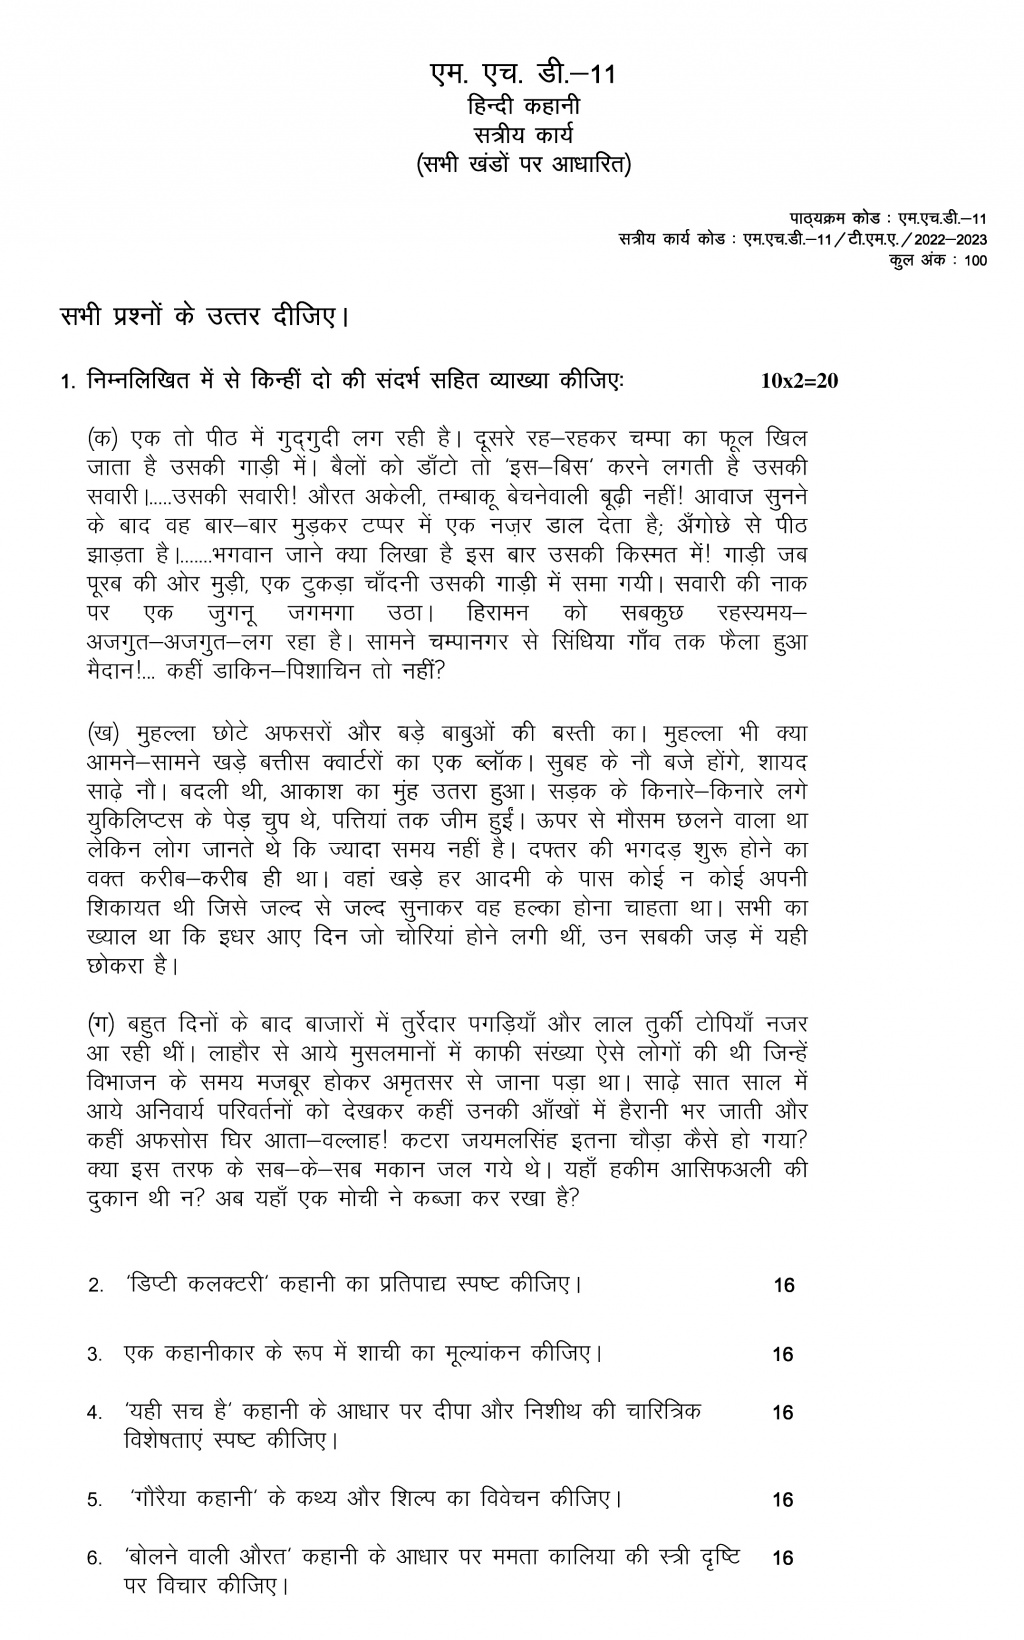 IGNOU MHD-11 - Hindi Kahani, Latest Solved Assignment-July 2022 – January 2023